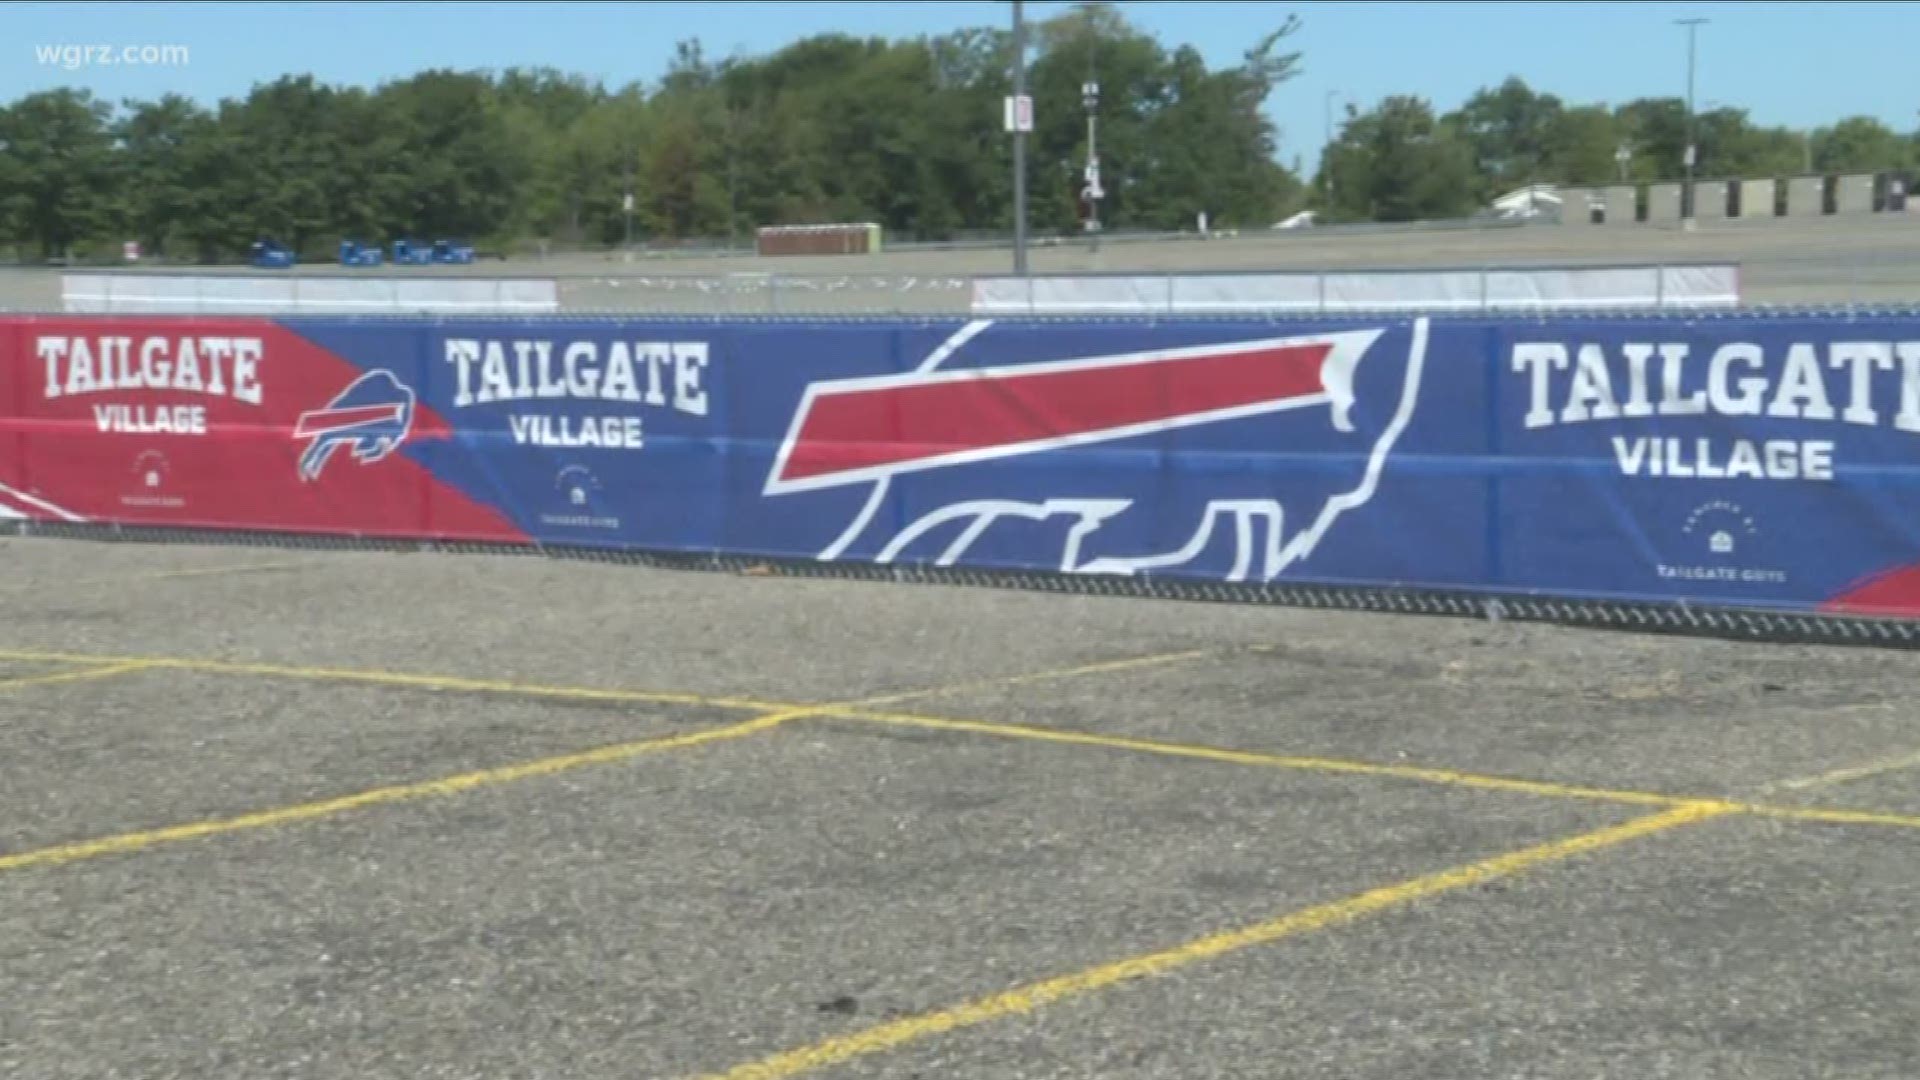 you'll have to head to the specially-marked tailgate village...